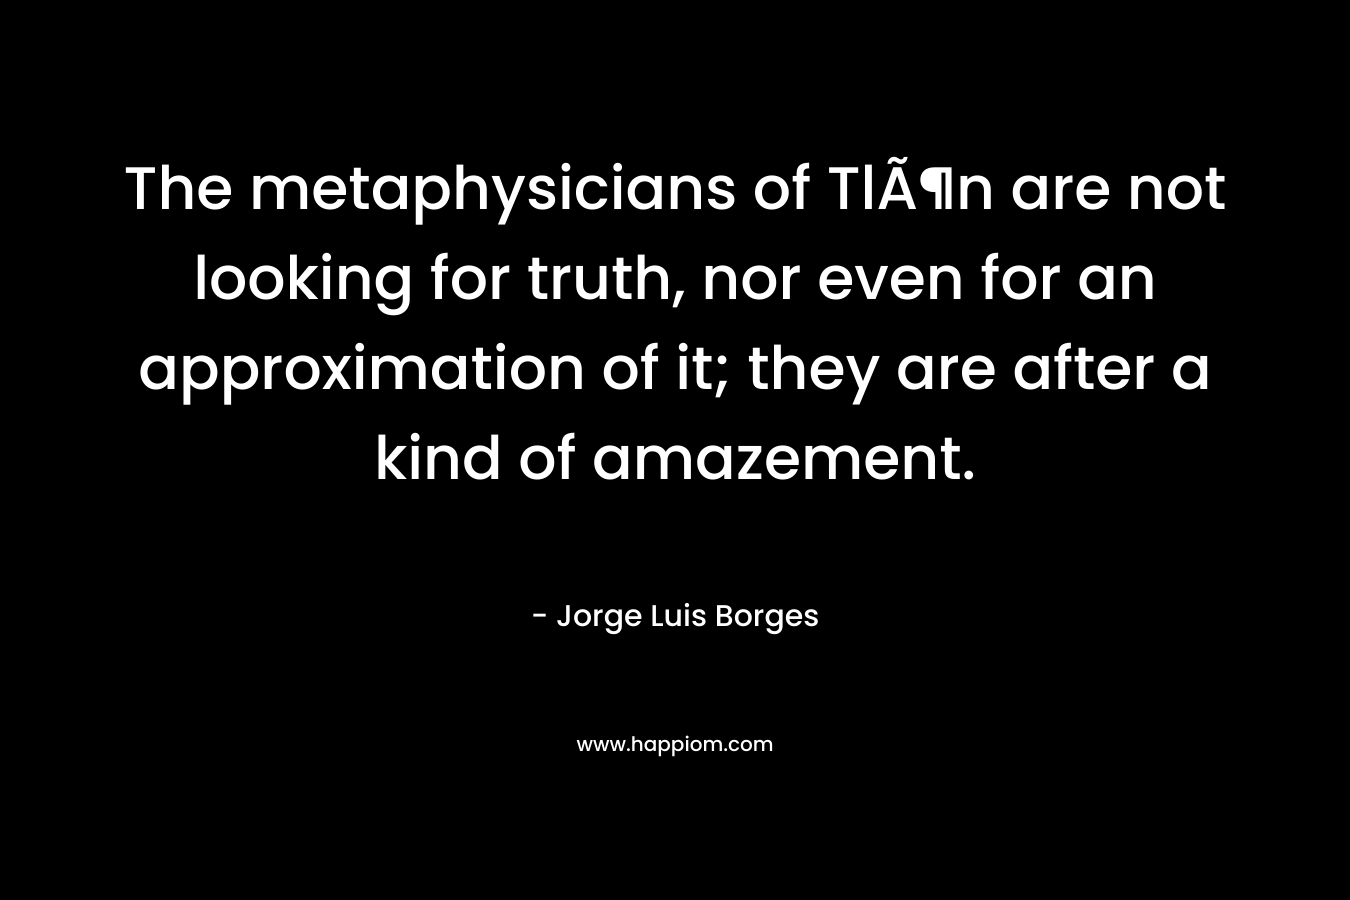 The metaphysicians of TlÃ¶n are not looking for truth, nor even for an approximation of it; they are after a kind of amazement. – Jorge Luis Borges